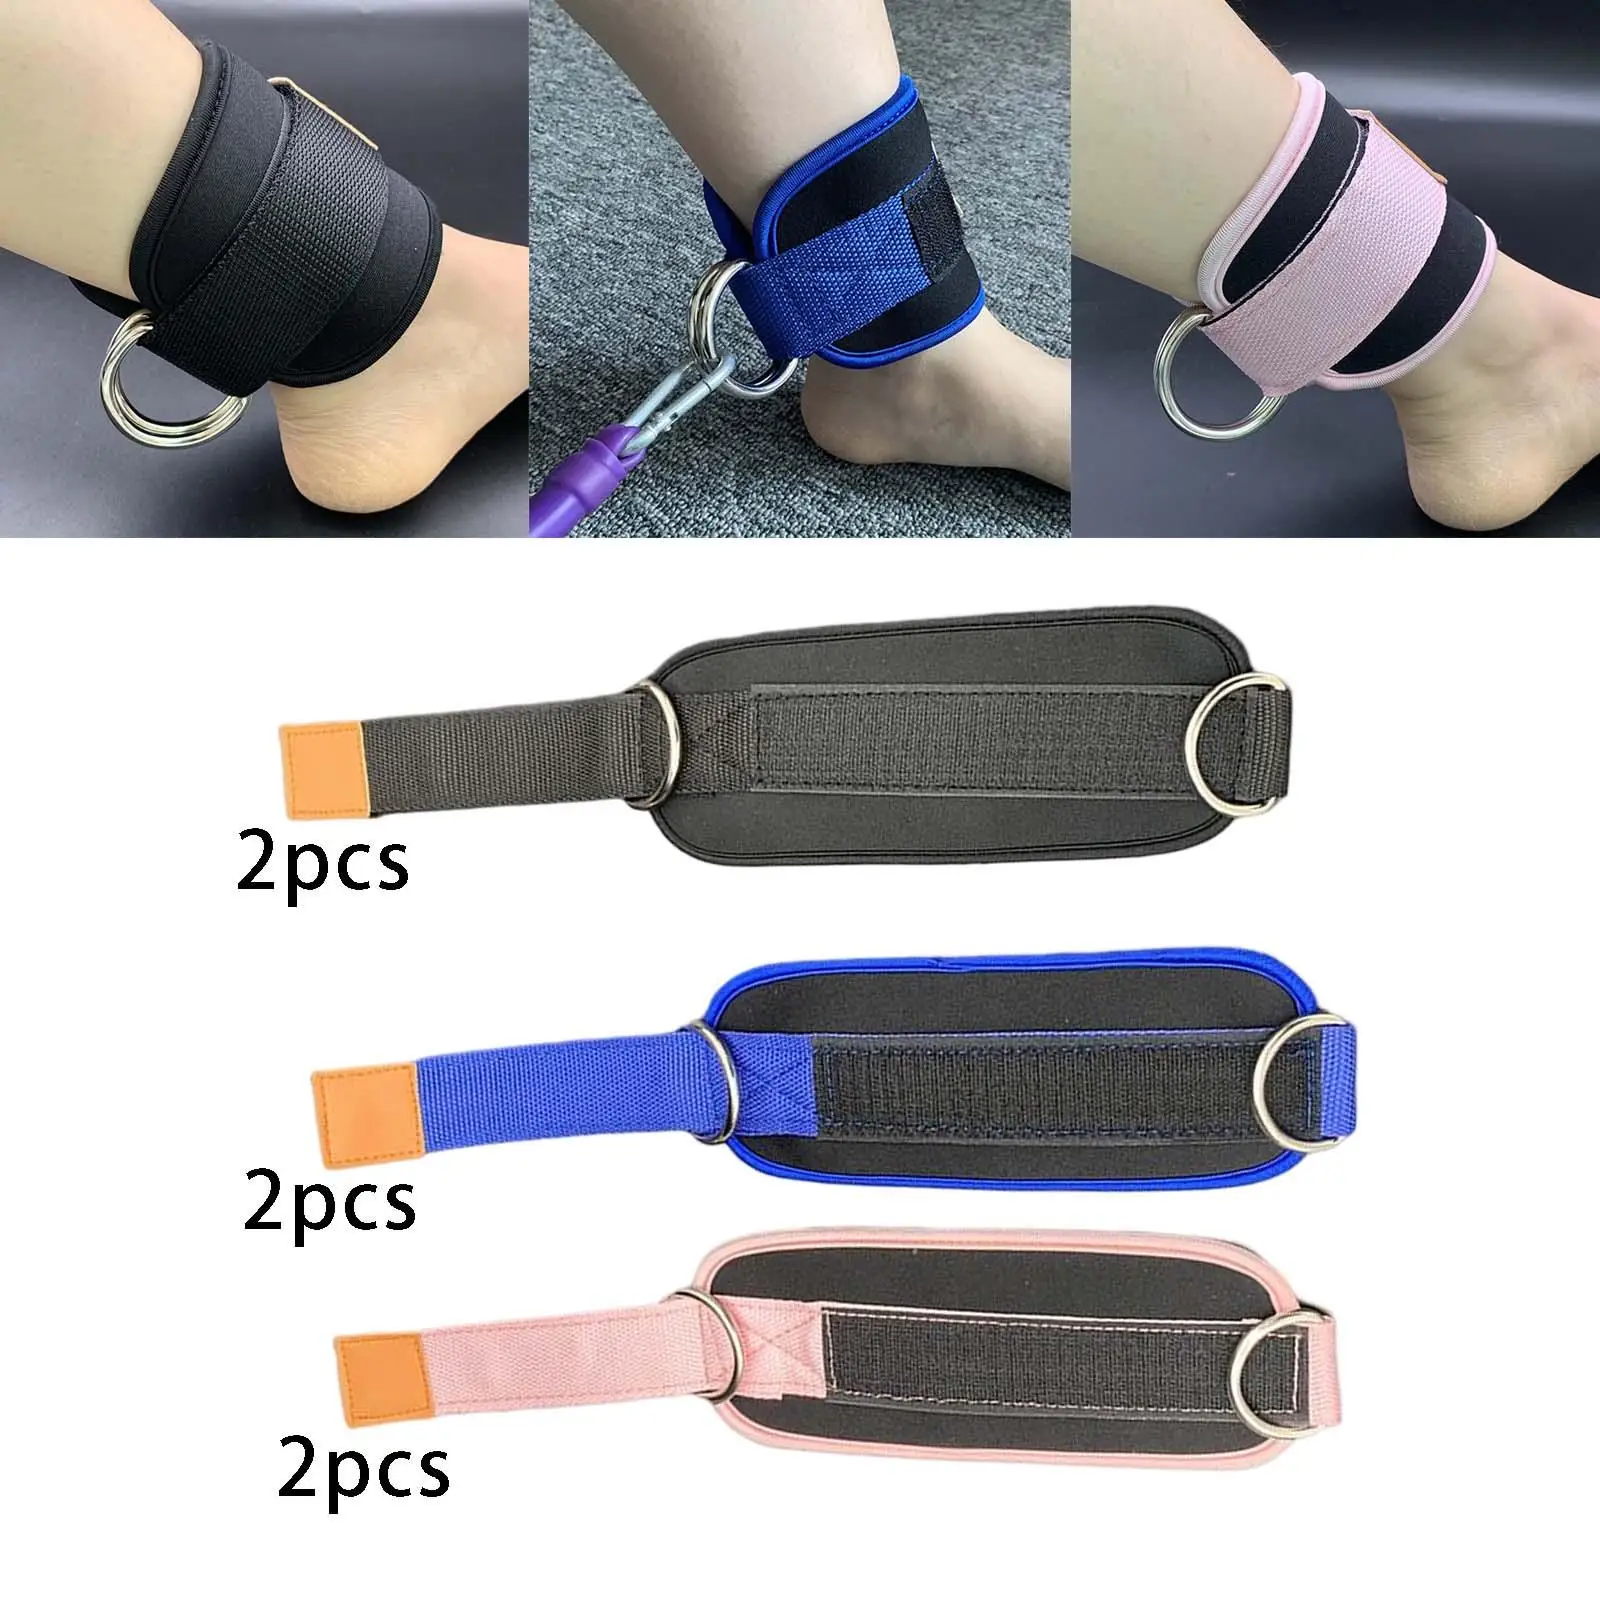 1 Pair Ankle Straps Ankle Cuffs Cable Machine Attachments for Booty Hip Abductors Exercise Curls Leg Extensions Glute Workouts 